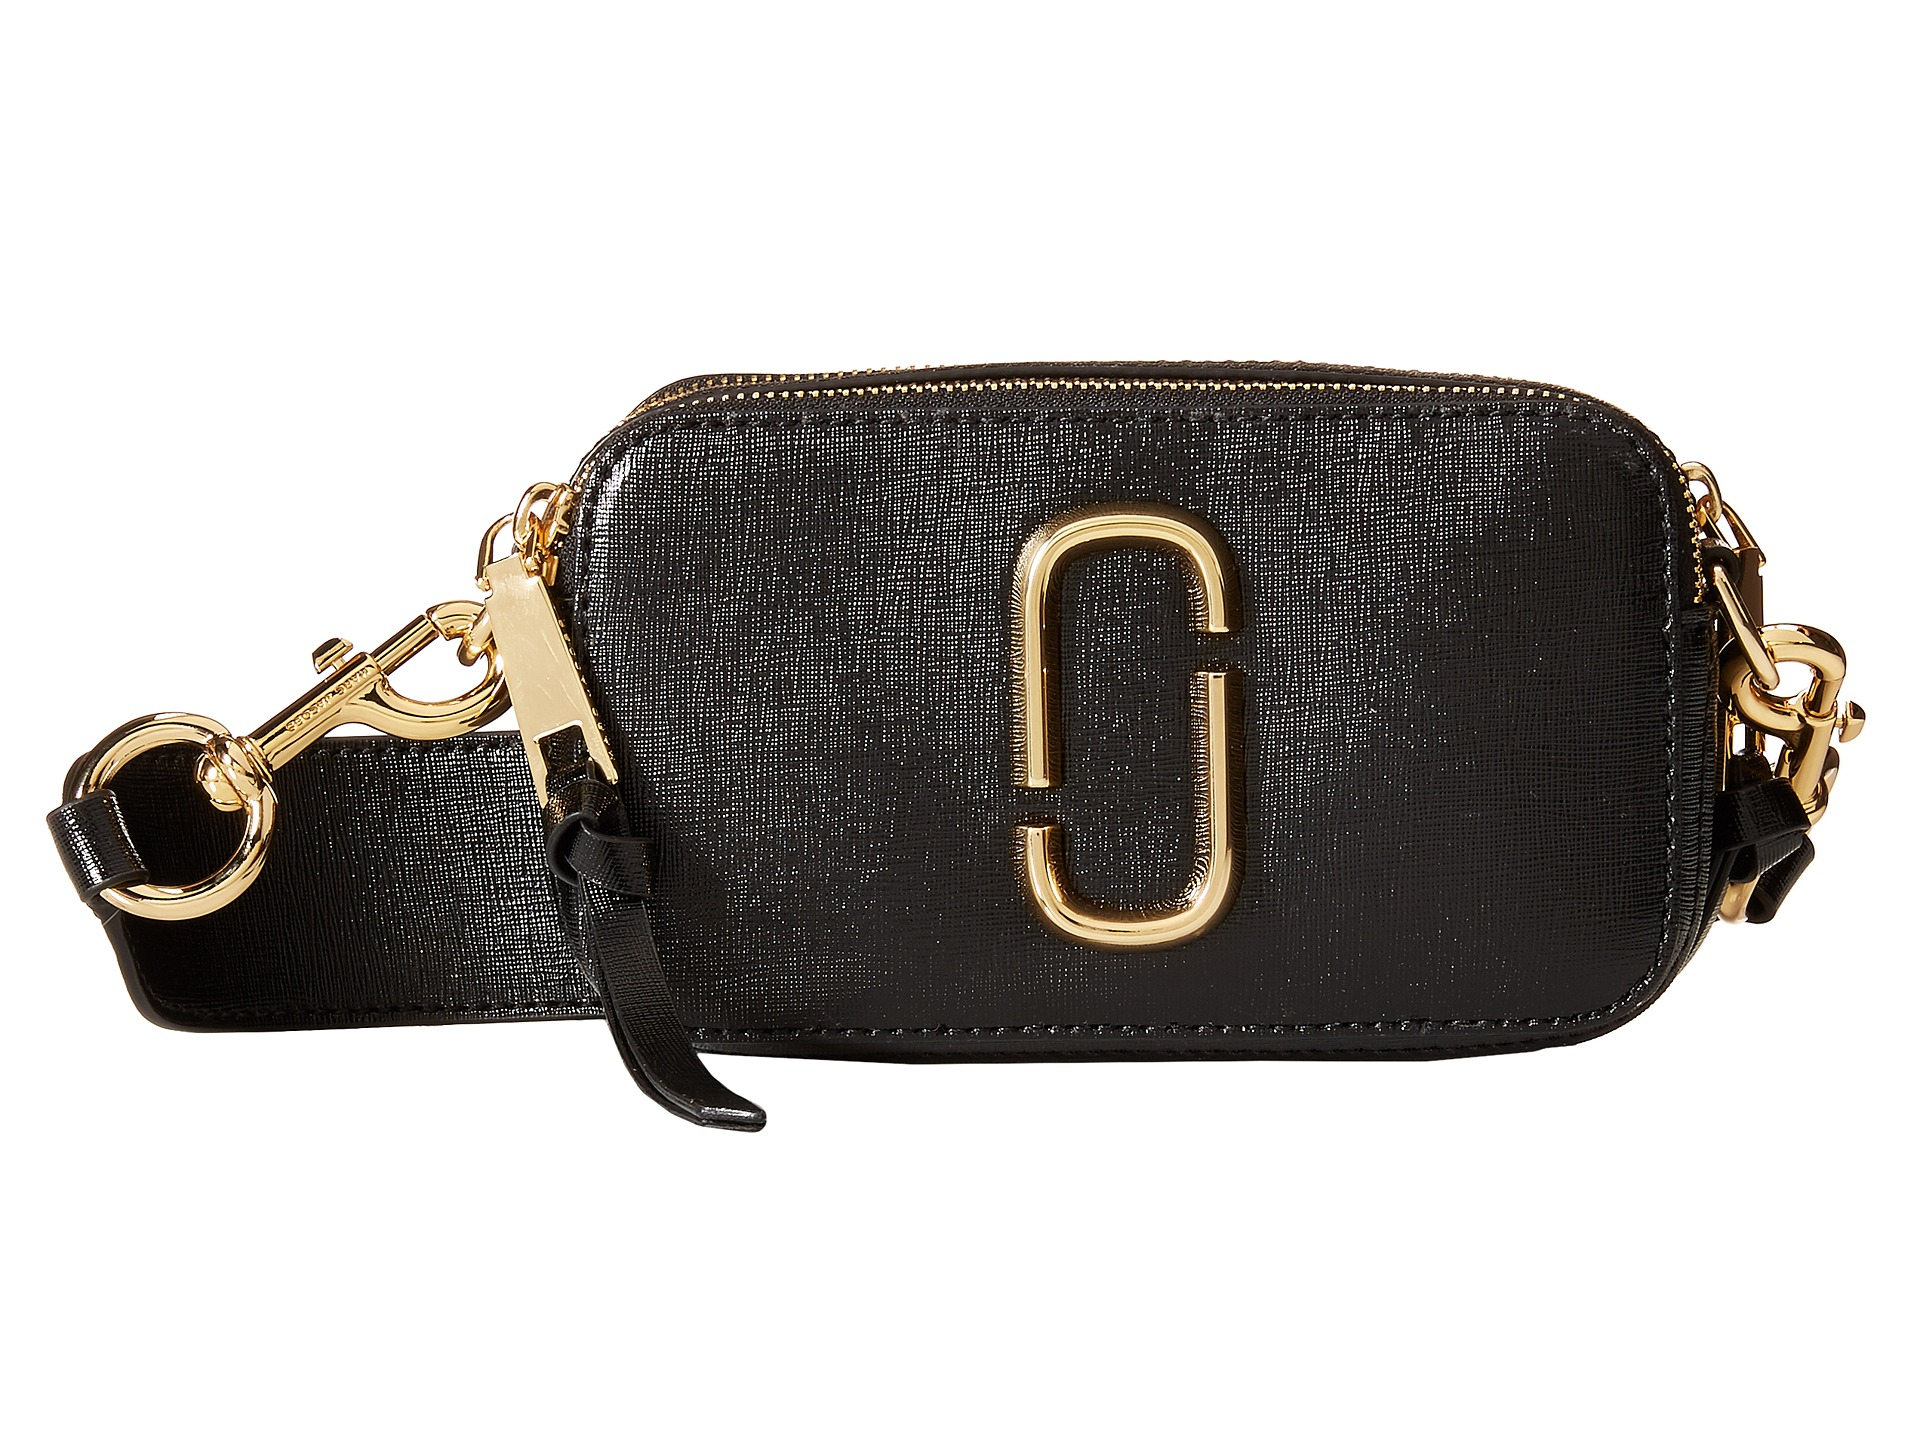 Marc jacobs Snapshot Colour Block Saffiano Small Camera Bag in Black | Lyst